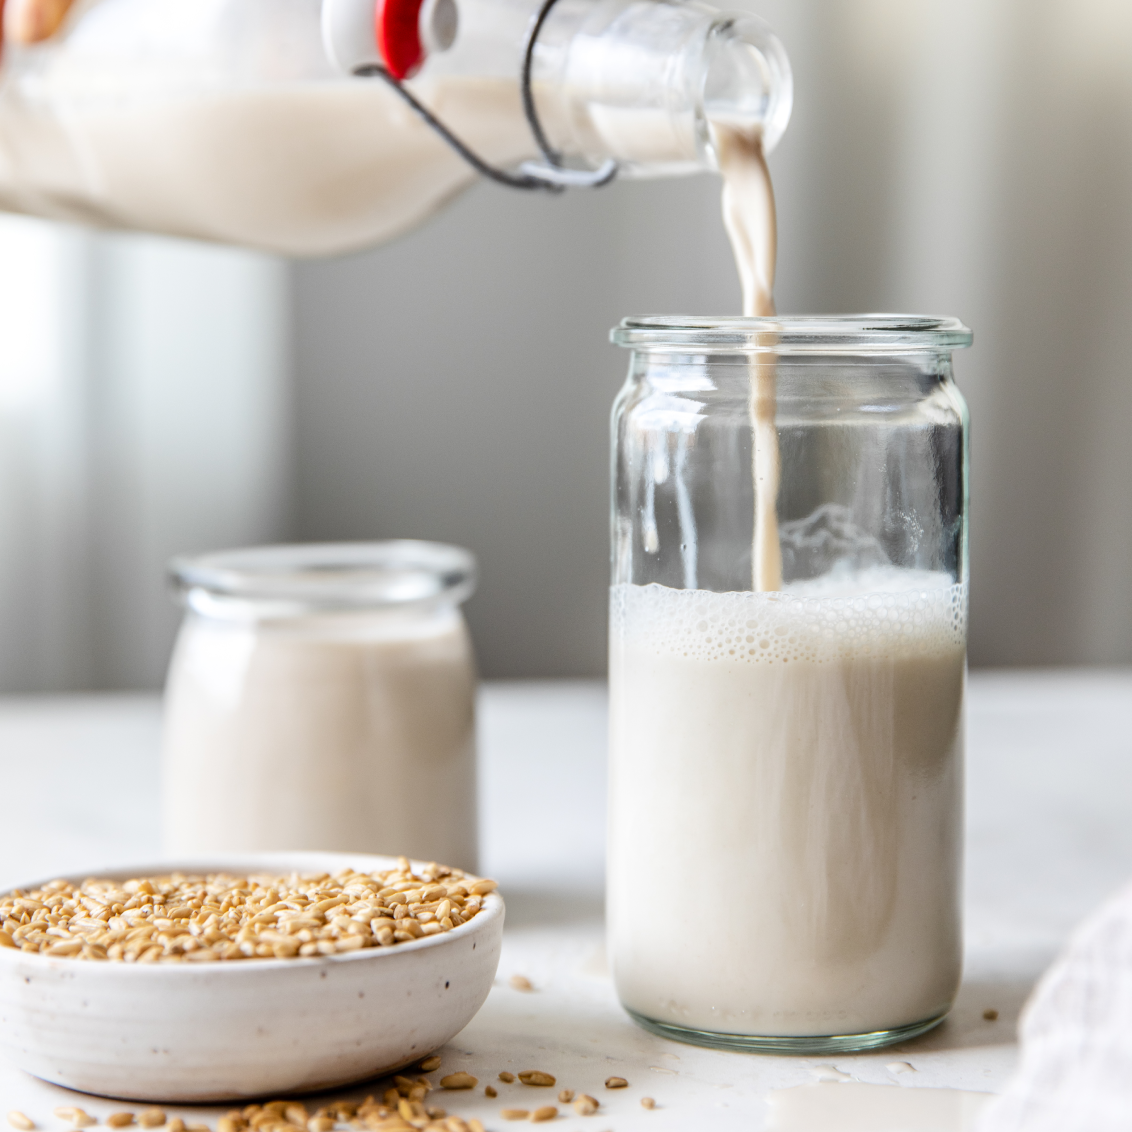 Pro Oat Milk being poured into glass cup